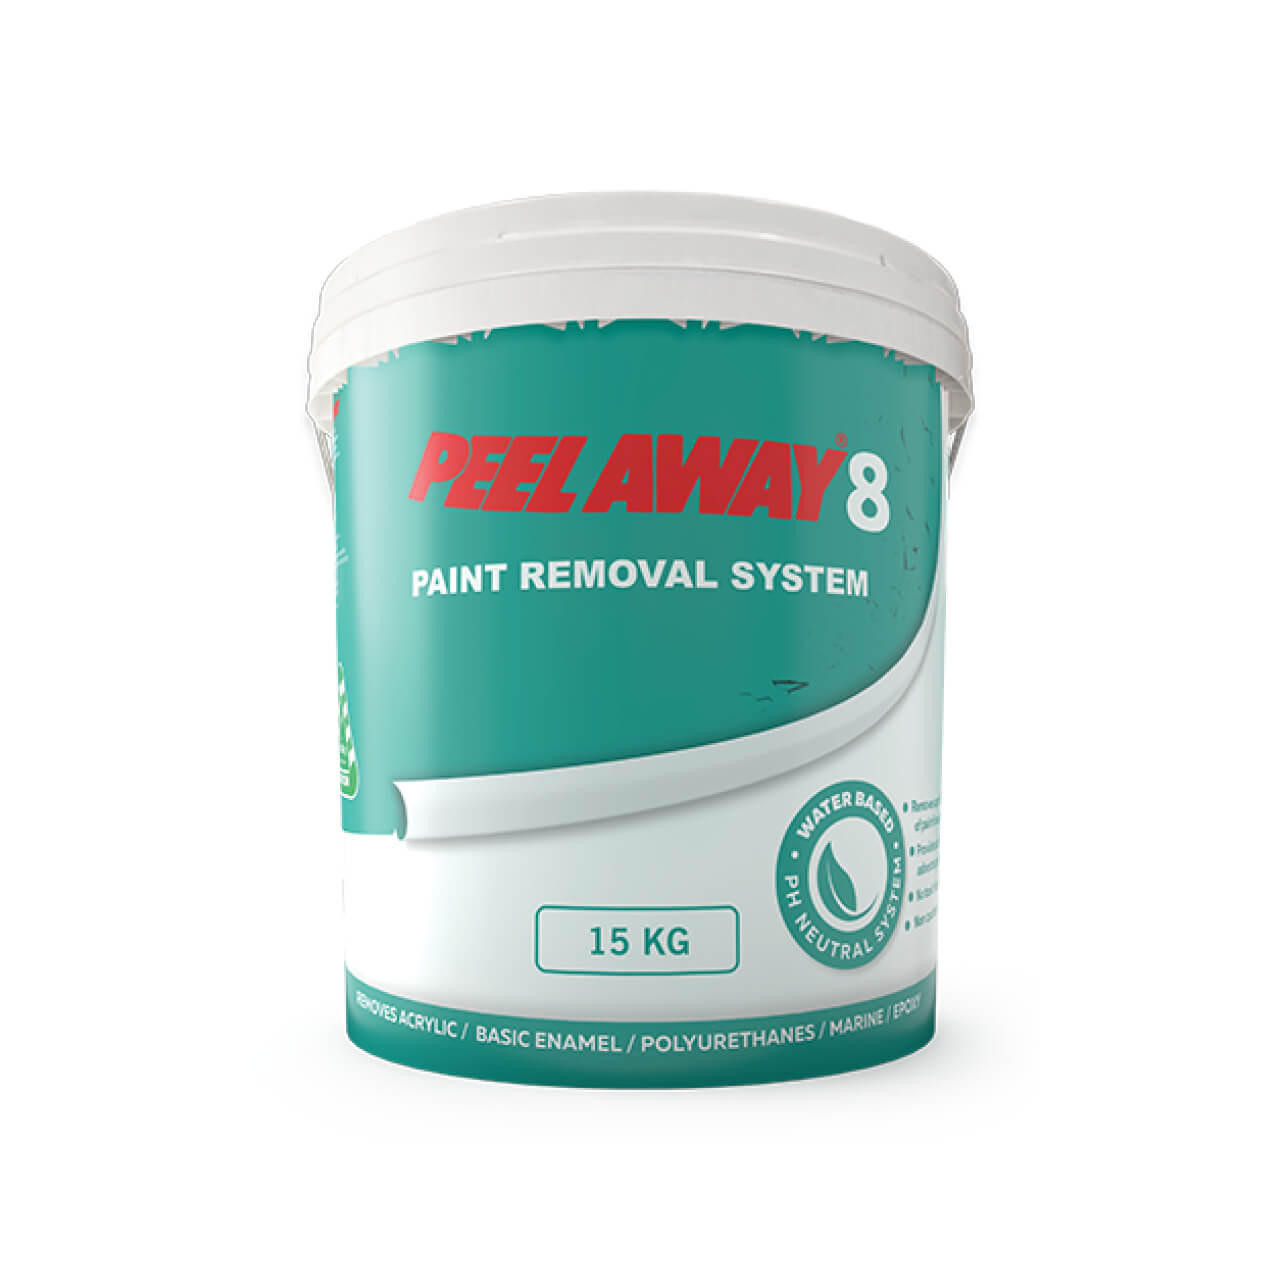  Peel Away 8 Paint Removal System PA8-15KG 